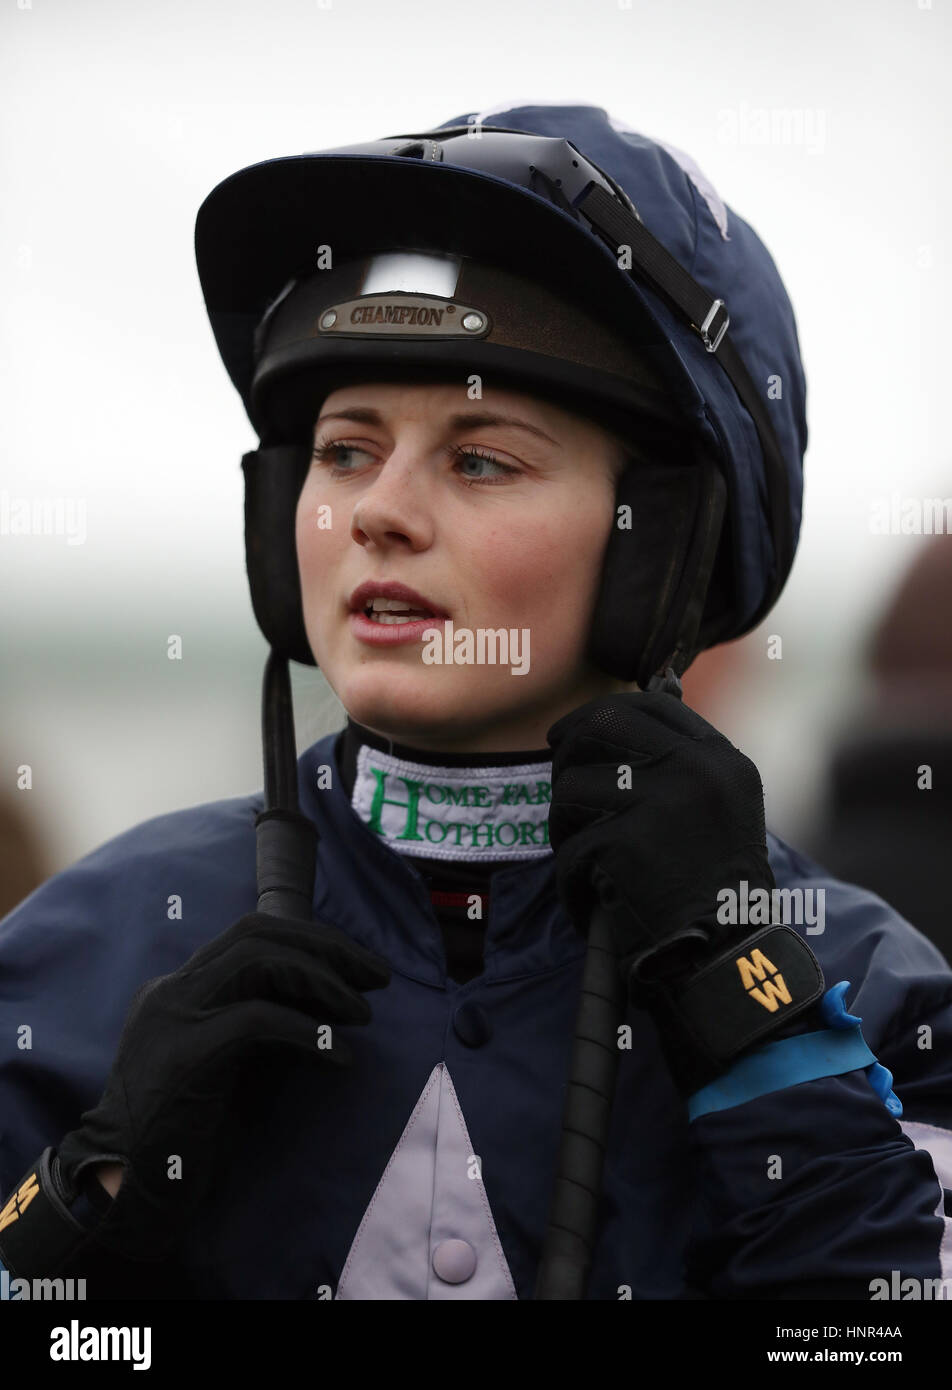 Jockey Bridget Andrews at Towcester Racecourse. PRESS ASSOCIATION Photo. Picture date: Wednesday February 15, 2017. Photo credit should read: David Davies/PA Wire Stock Photo